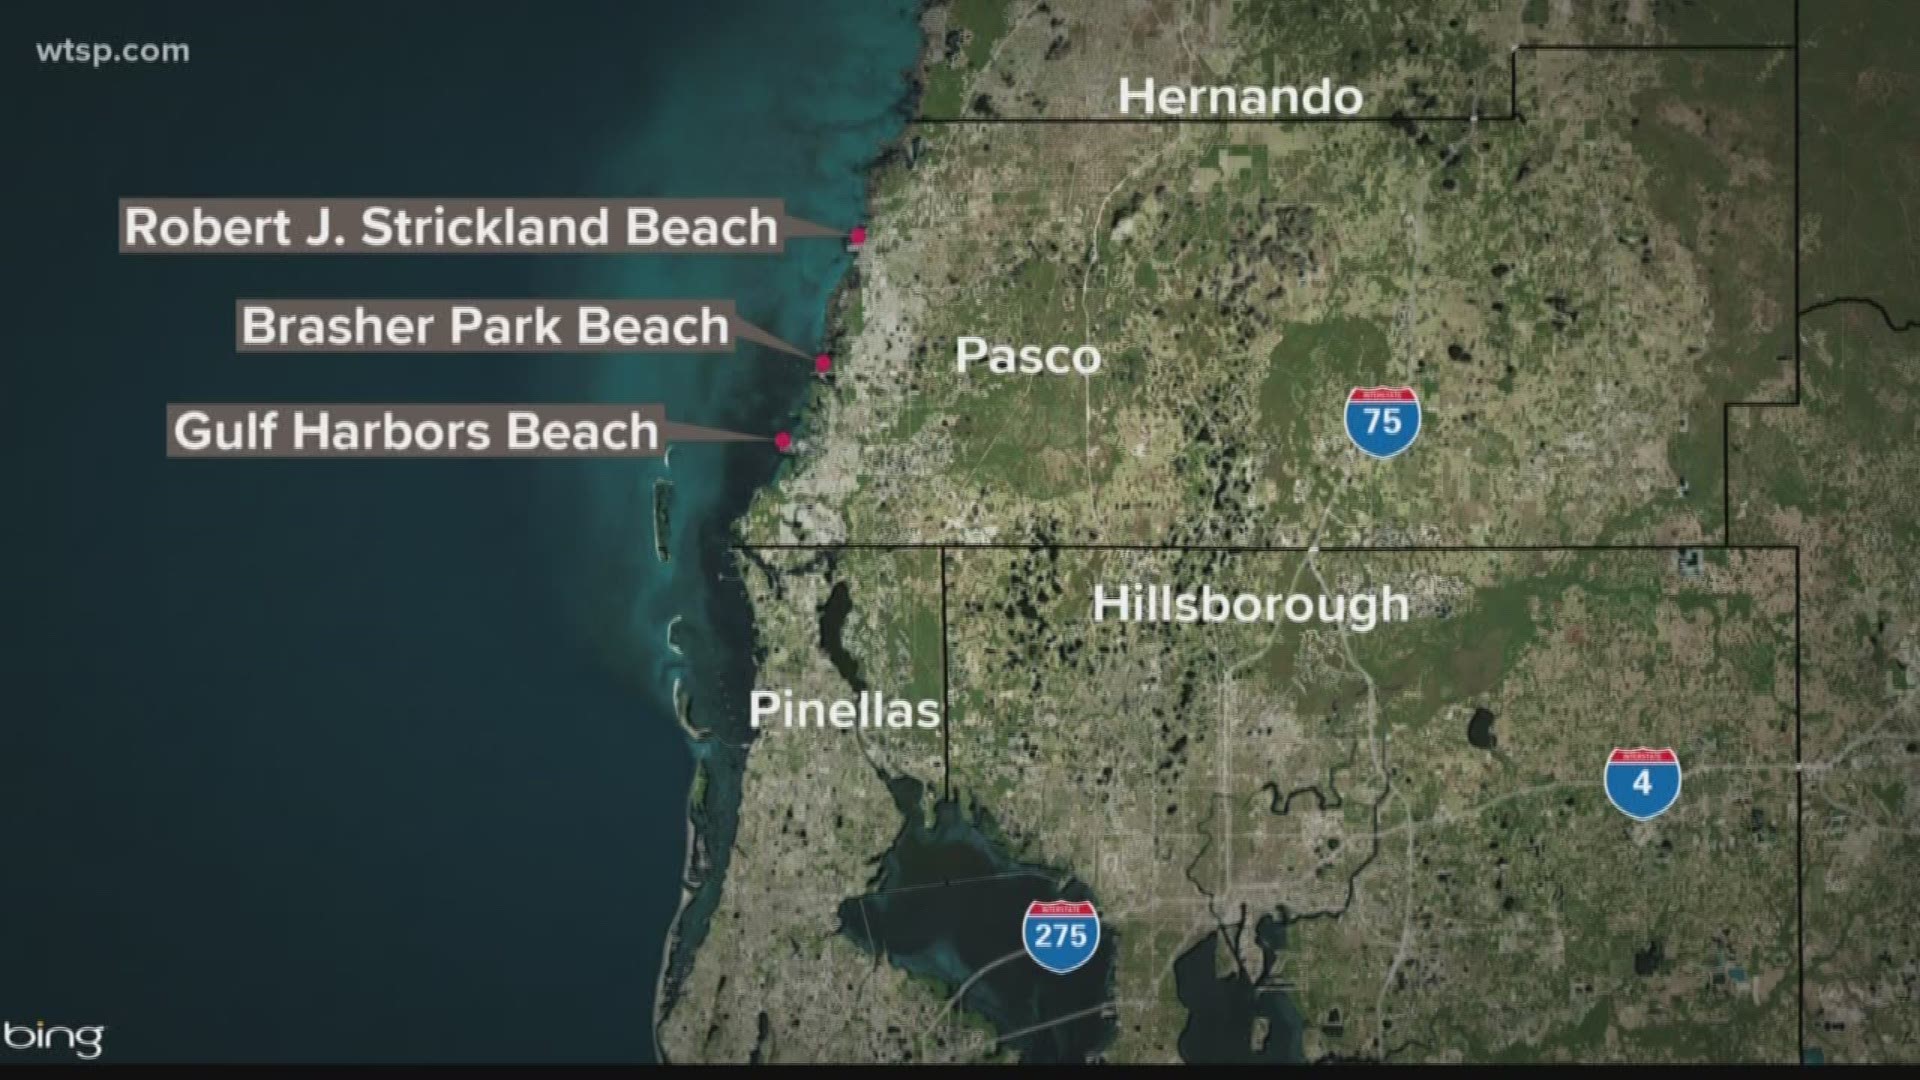 A water quality advisory has been issued for three beaches in Pasco County after water sample testing found "fecal pollution."

The Department of Health in Pasco County said advisories were issued for Robert J. Strickland Beach, Brasher Park Beach and Gulf Harbors Beach. The advisory is based on the presence of enterococci (intestinal bacteria) in the water samples.

The department said it monitors beach water samples for the bacteria, which can cause human disease, infections or rashes. The presence of this bacteria is an indication of "fecal pollution," which can come from storm water runoff, pets, wildlife and human sewage.

The department said the next water sampling date is set for July 22.